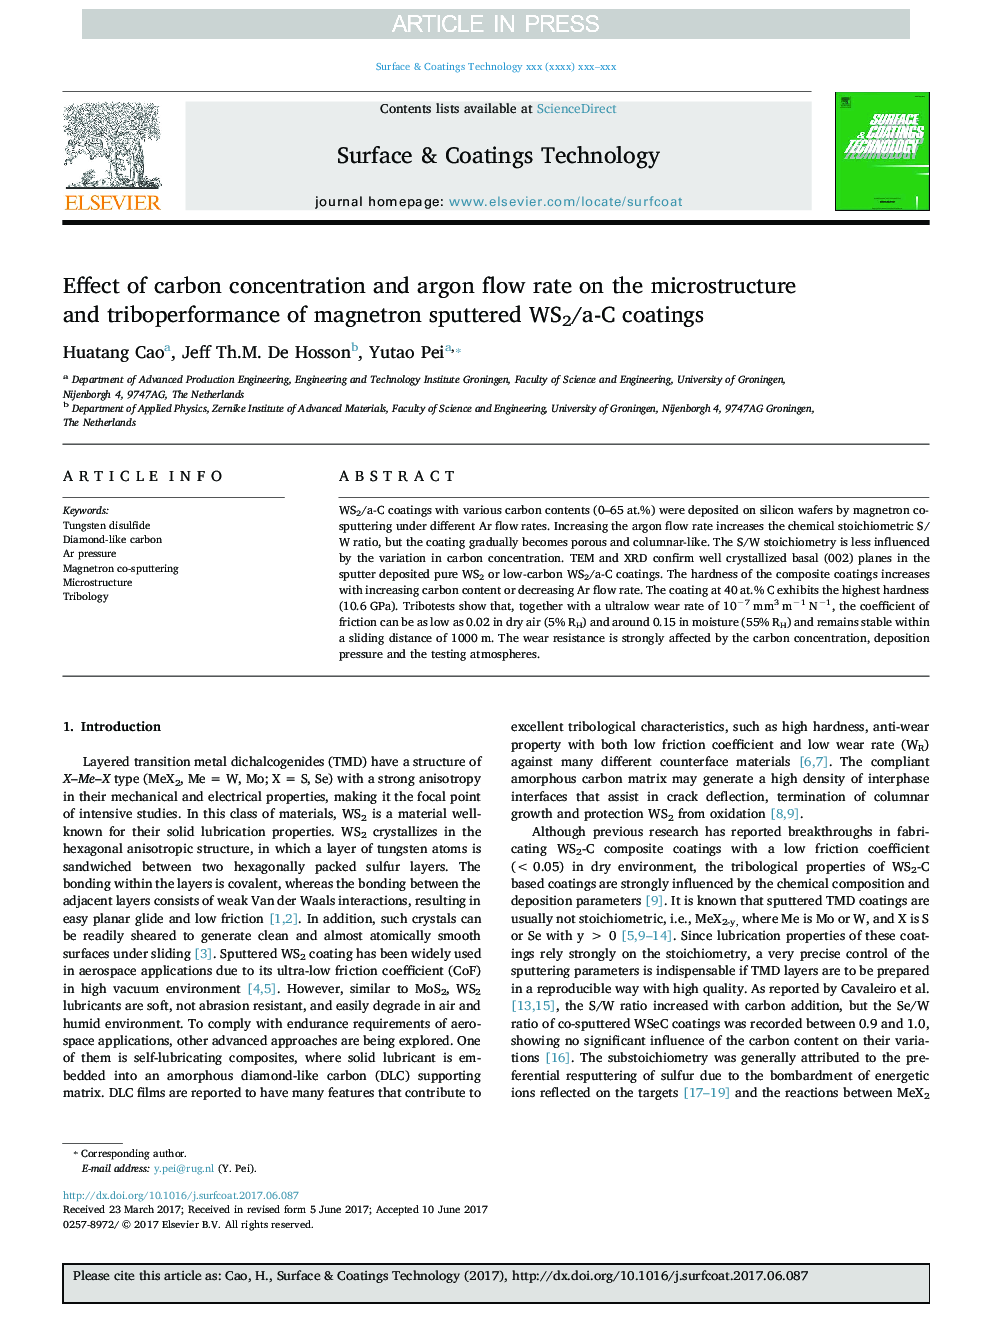 Effect of carbon concentration and argon flow rate on the microstructure and triboperformance of magnetron sputtered WS2/a-C coatings